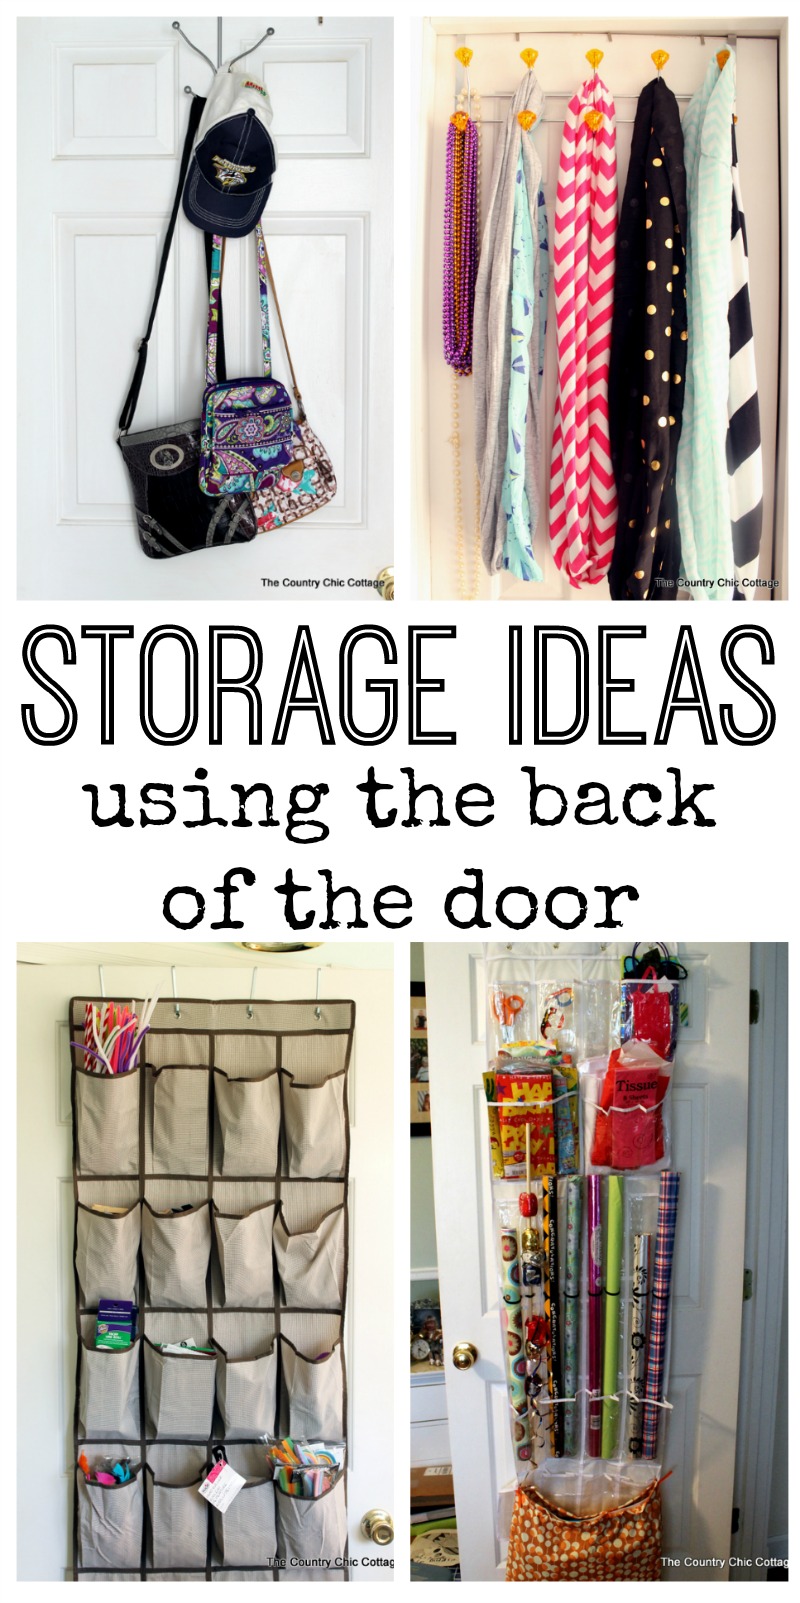 https://www.thecountrychiccottage.net/wp-content/uploads/2016/04/storage-ideas-using-the-back-of-the-door-collage.jpg